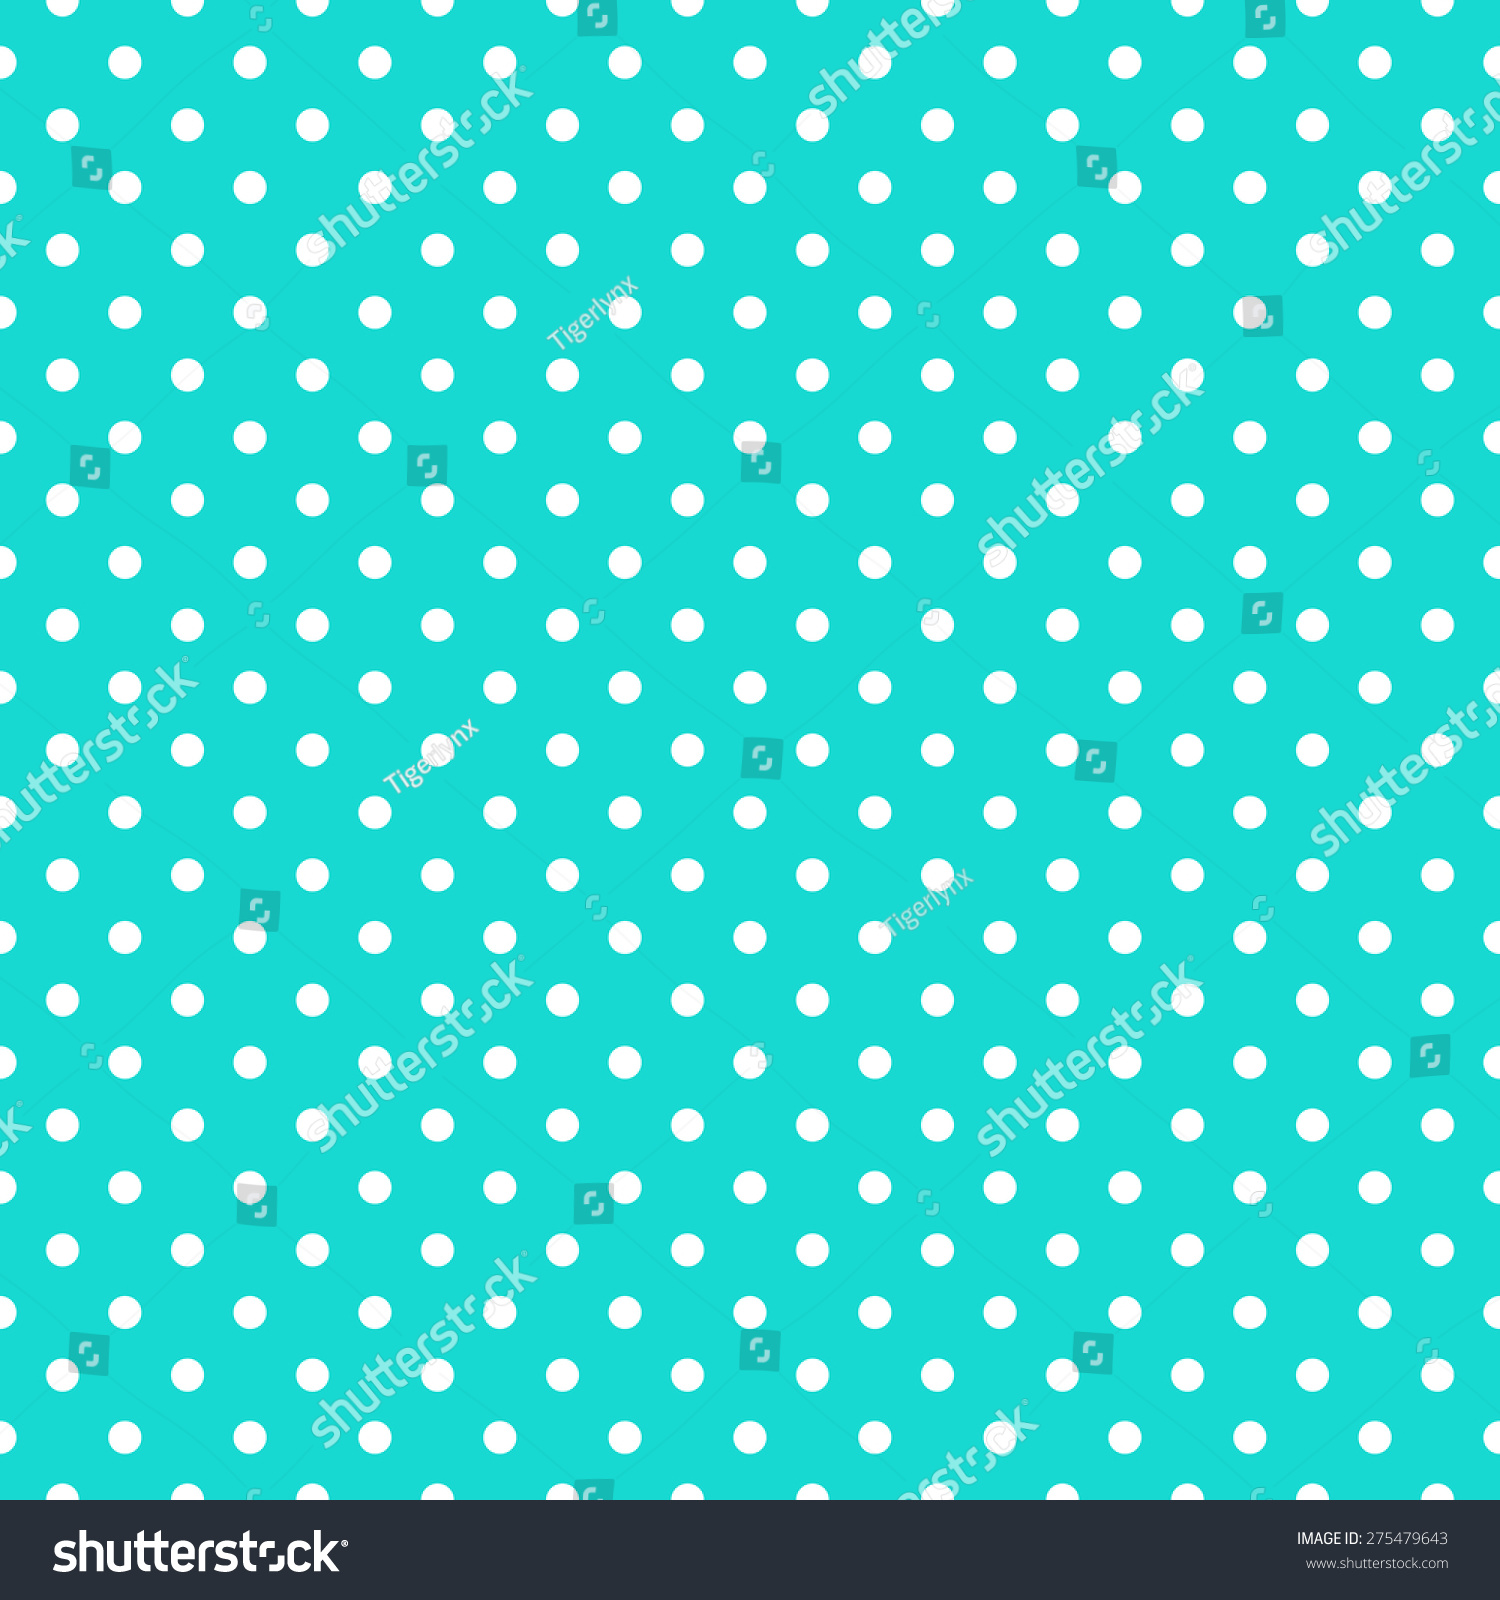 Seamless Repeating Classic Polka Dot Spotty Pattern With White Spots On ...